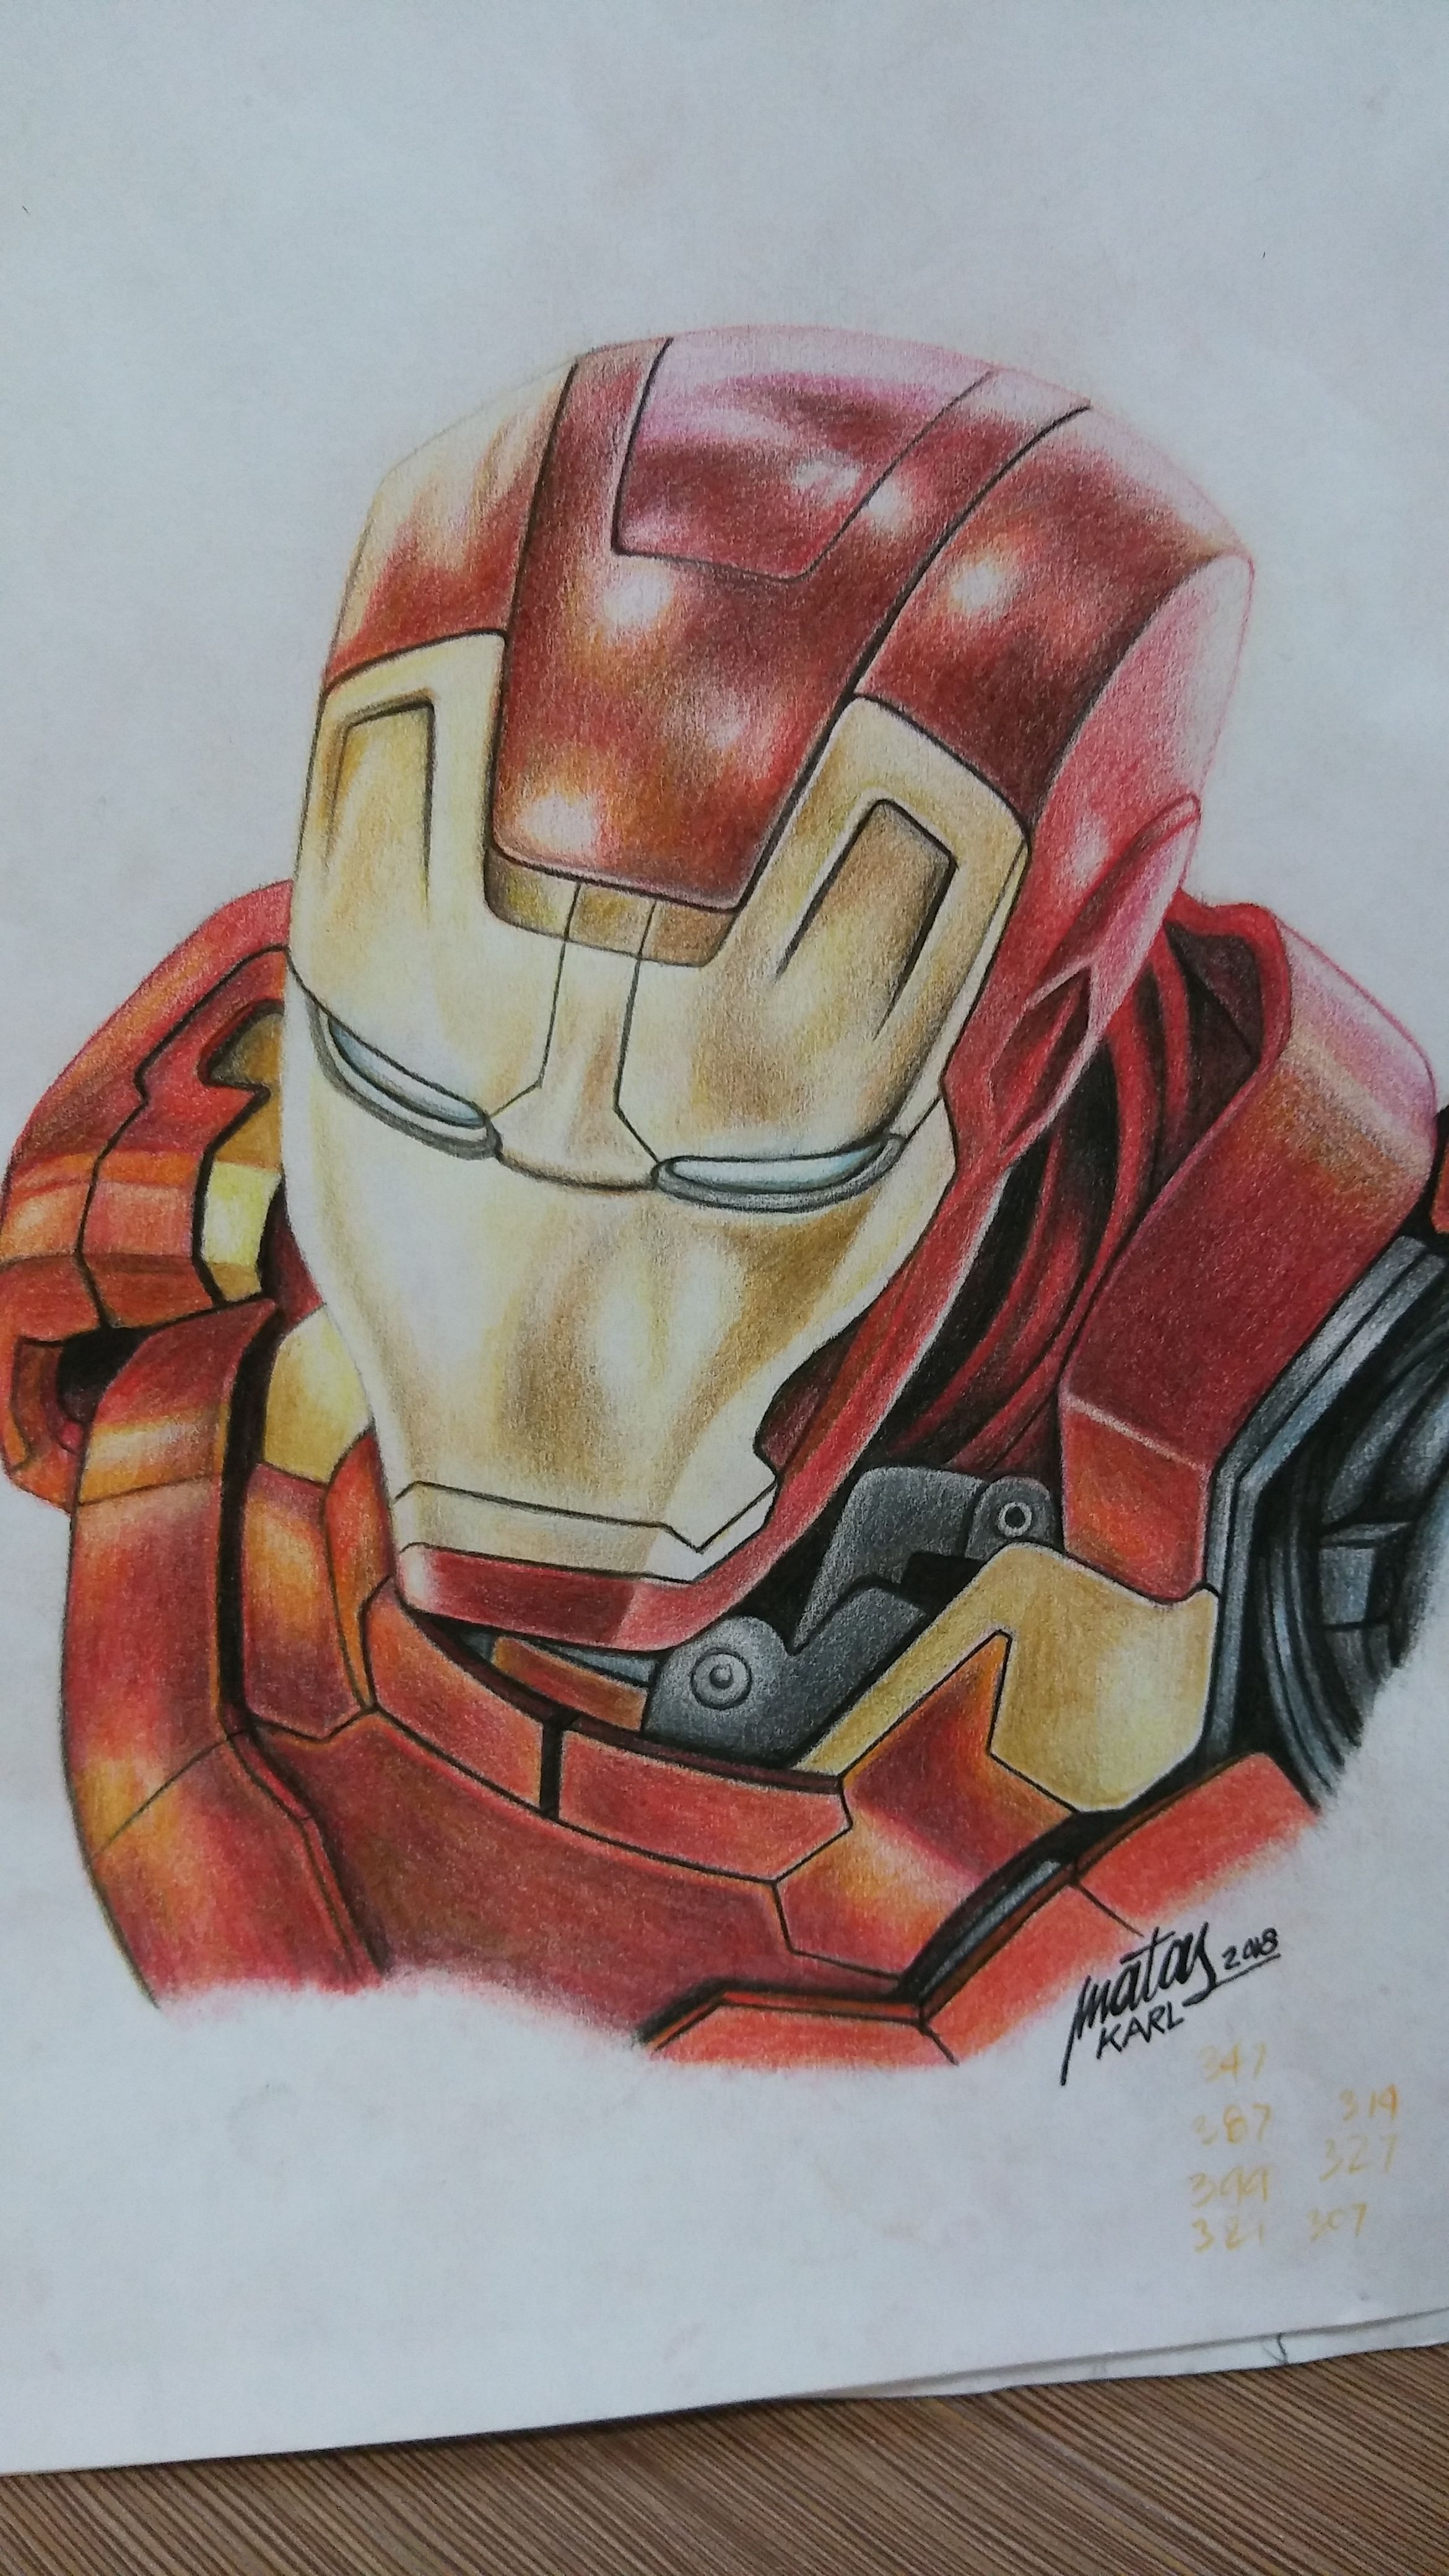 How to Draw Iron-man Avengers with pencil shading. - YouTube